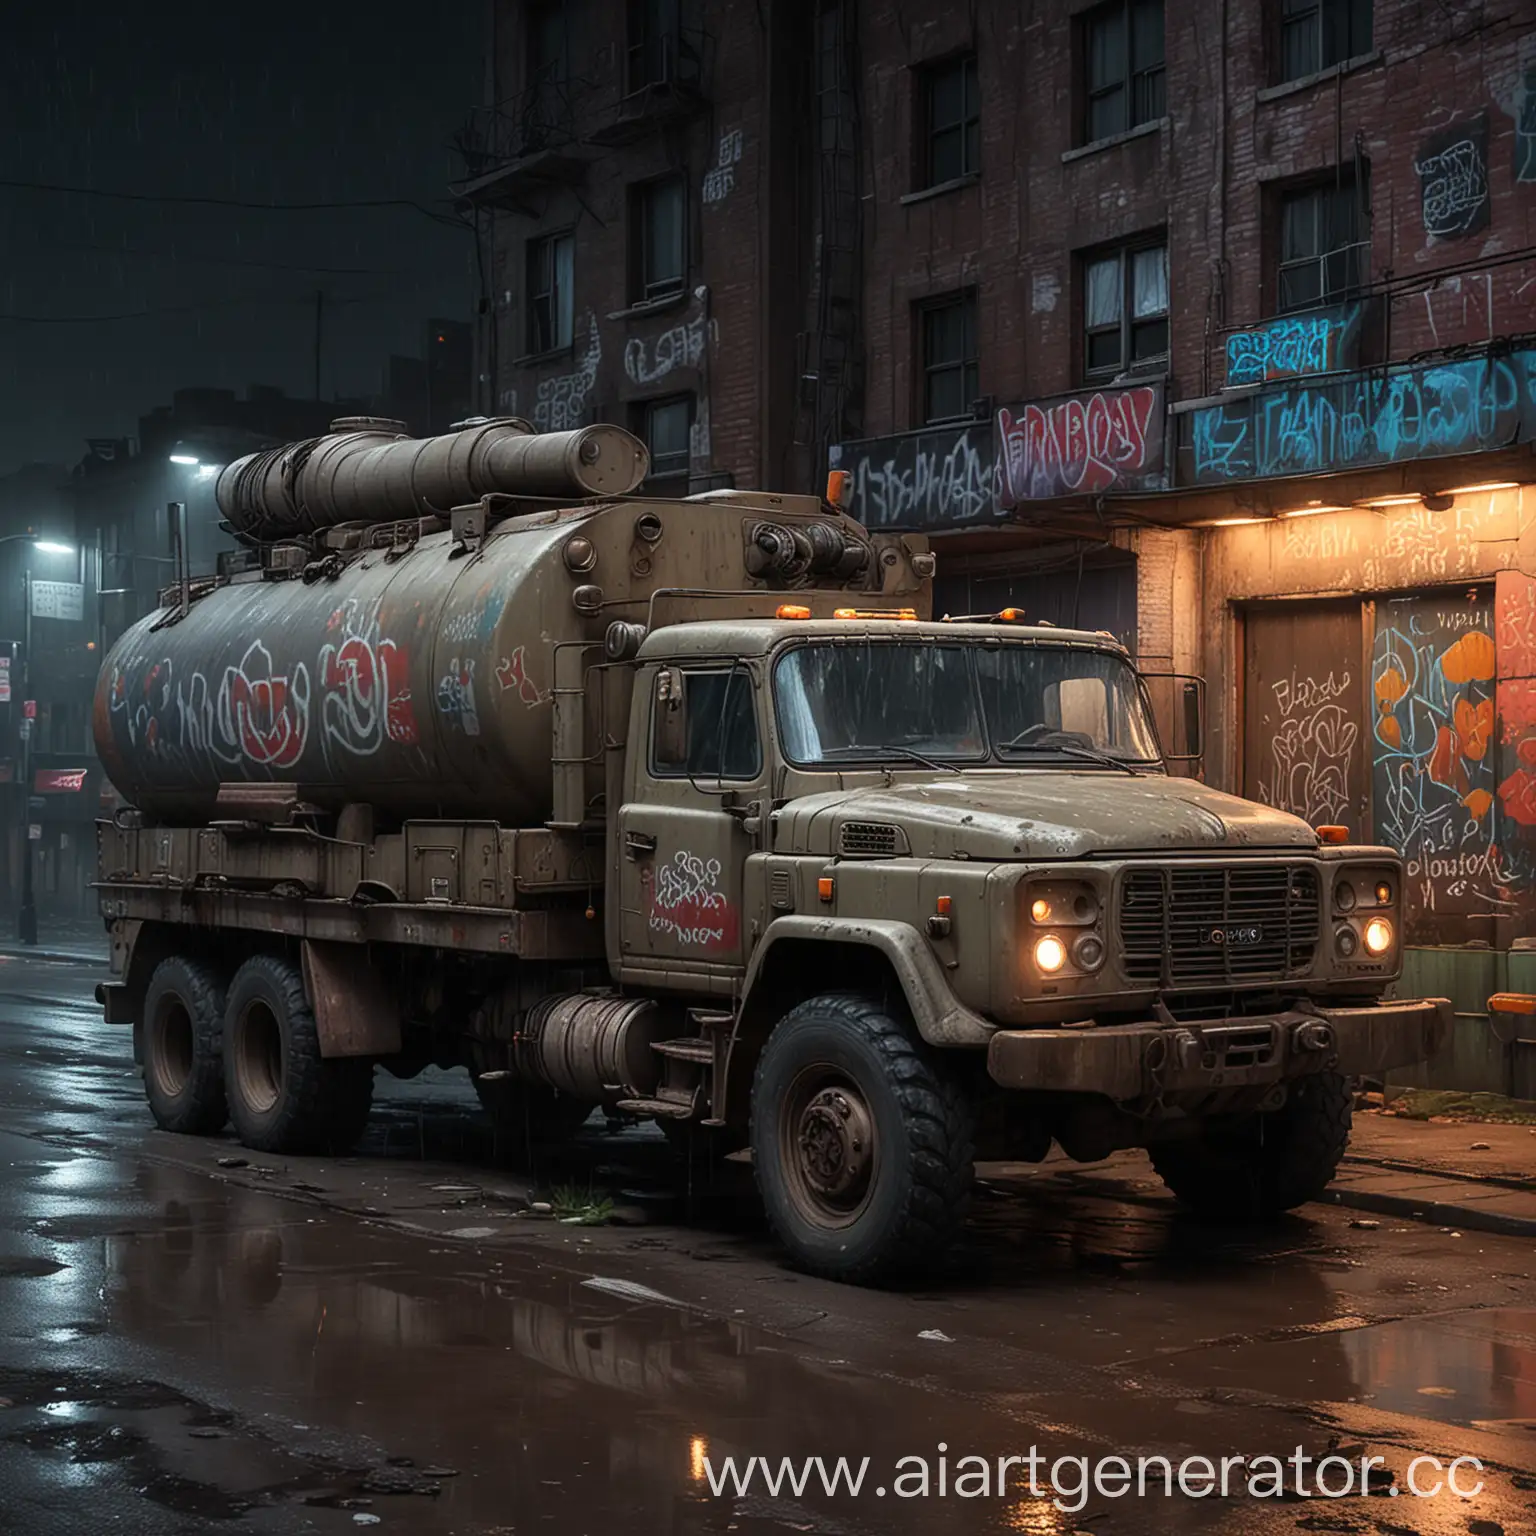 A truck with a tank in the ghetto, graffiti and neon signs on the walls. Night and rain. Realism